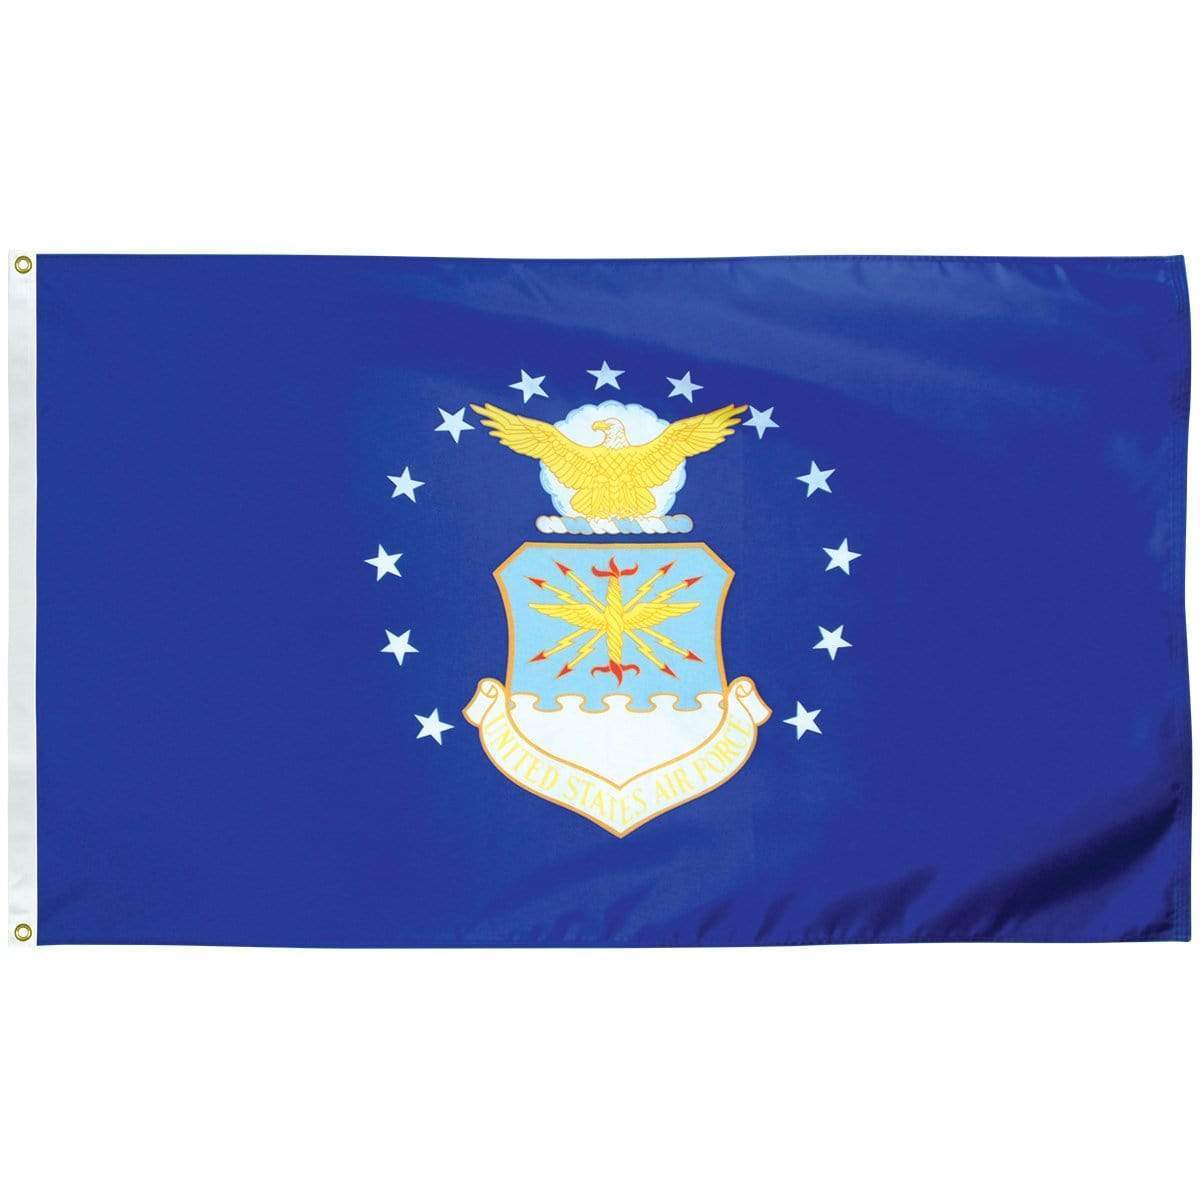 Discover the Ultimate Collection of Flags at Ultimate Flags Inc